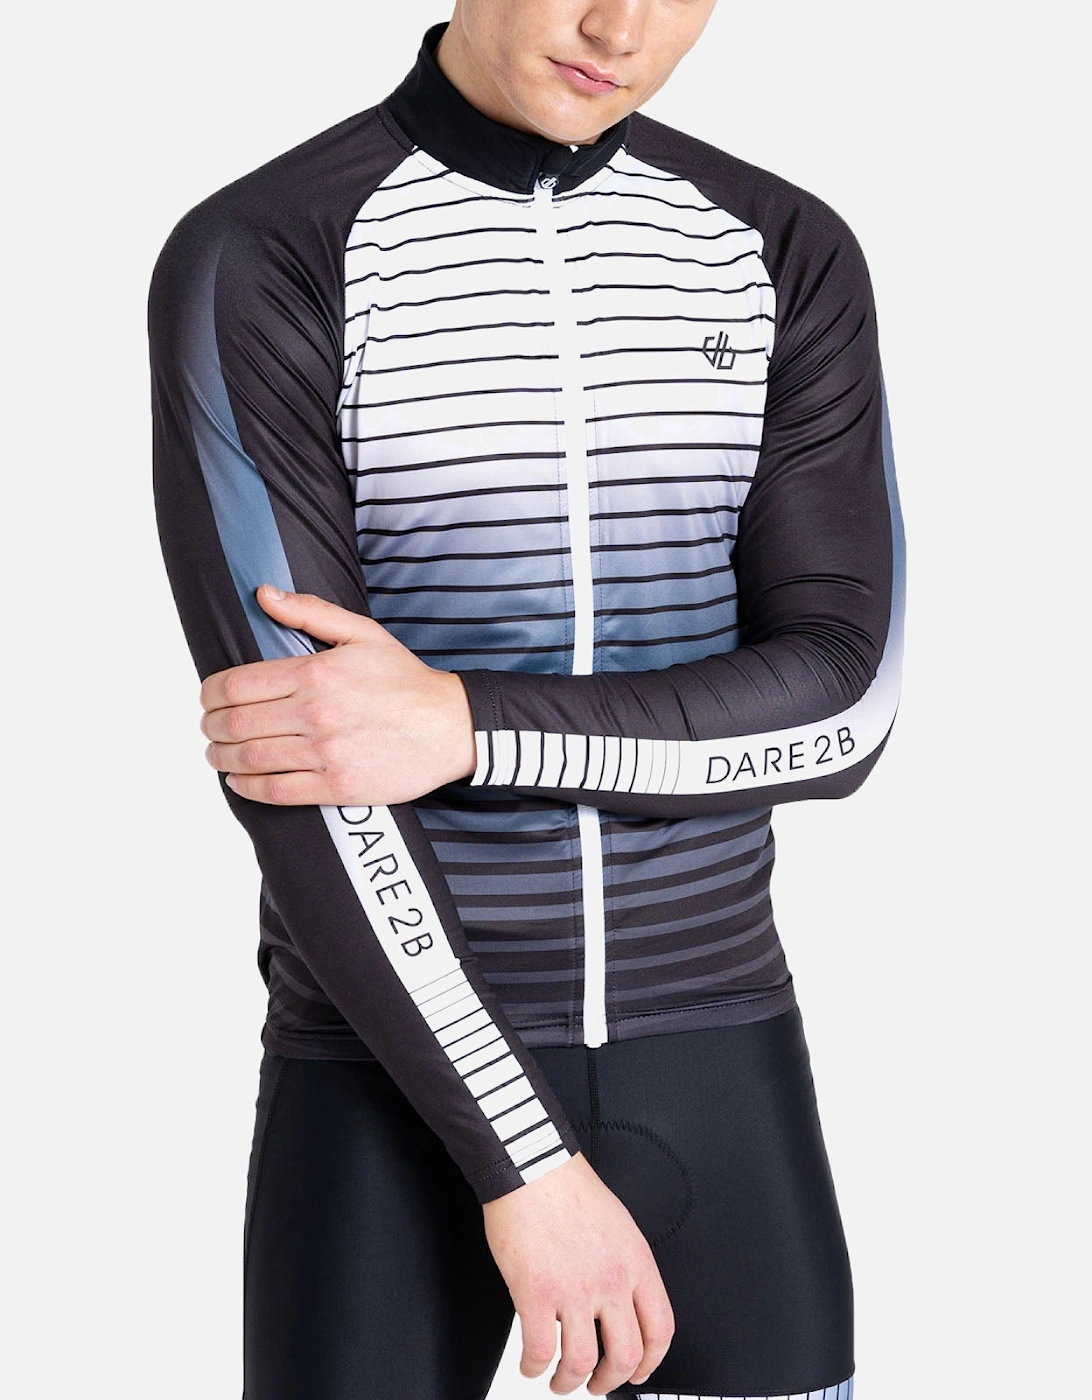 Mens AEP Virtuous Long Sleeve Reflective Cycling Jersey